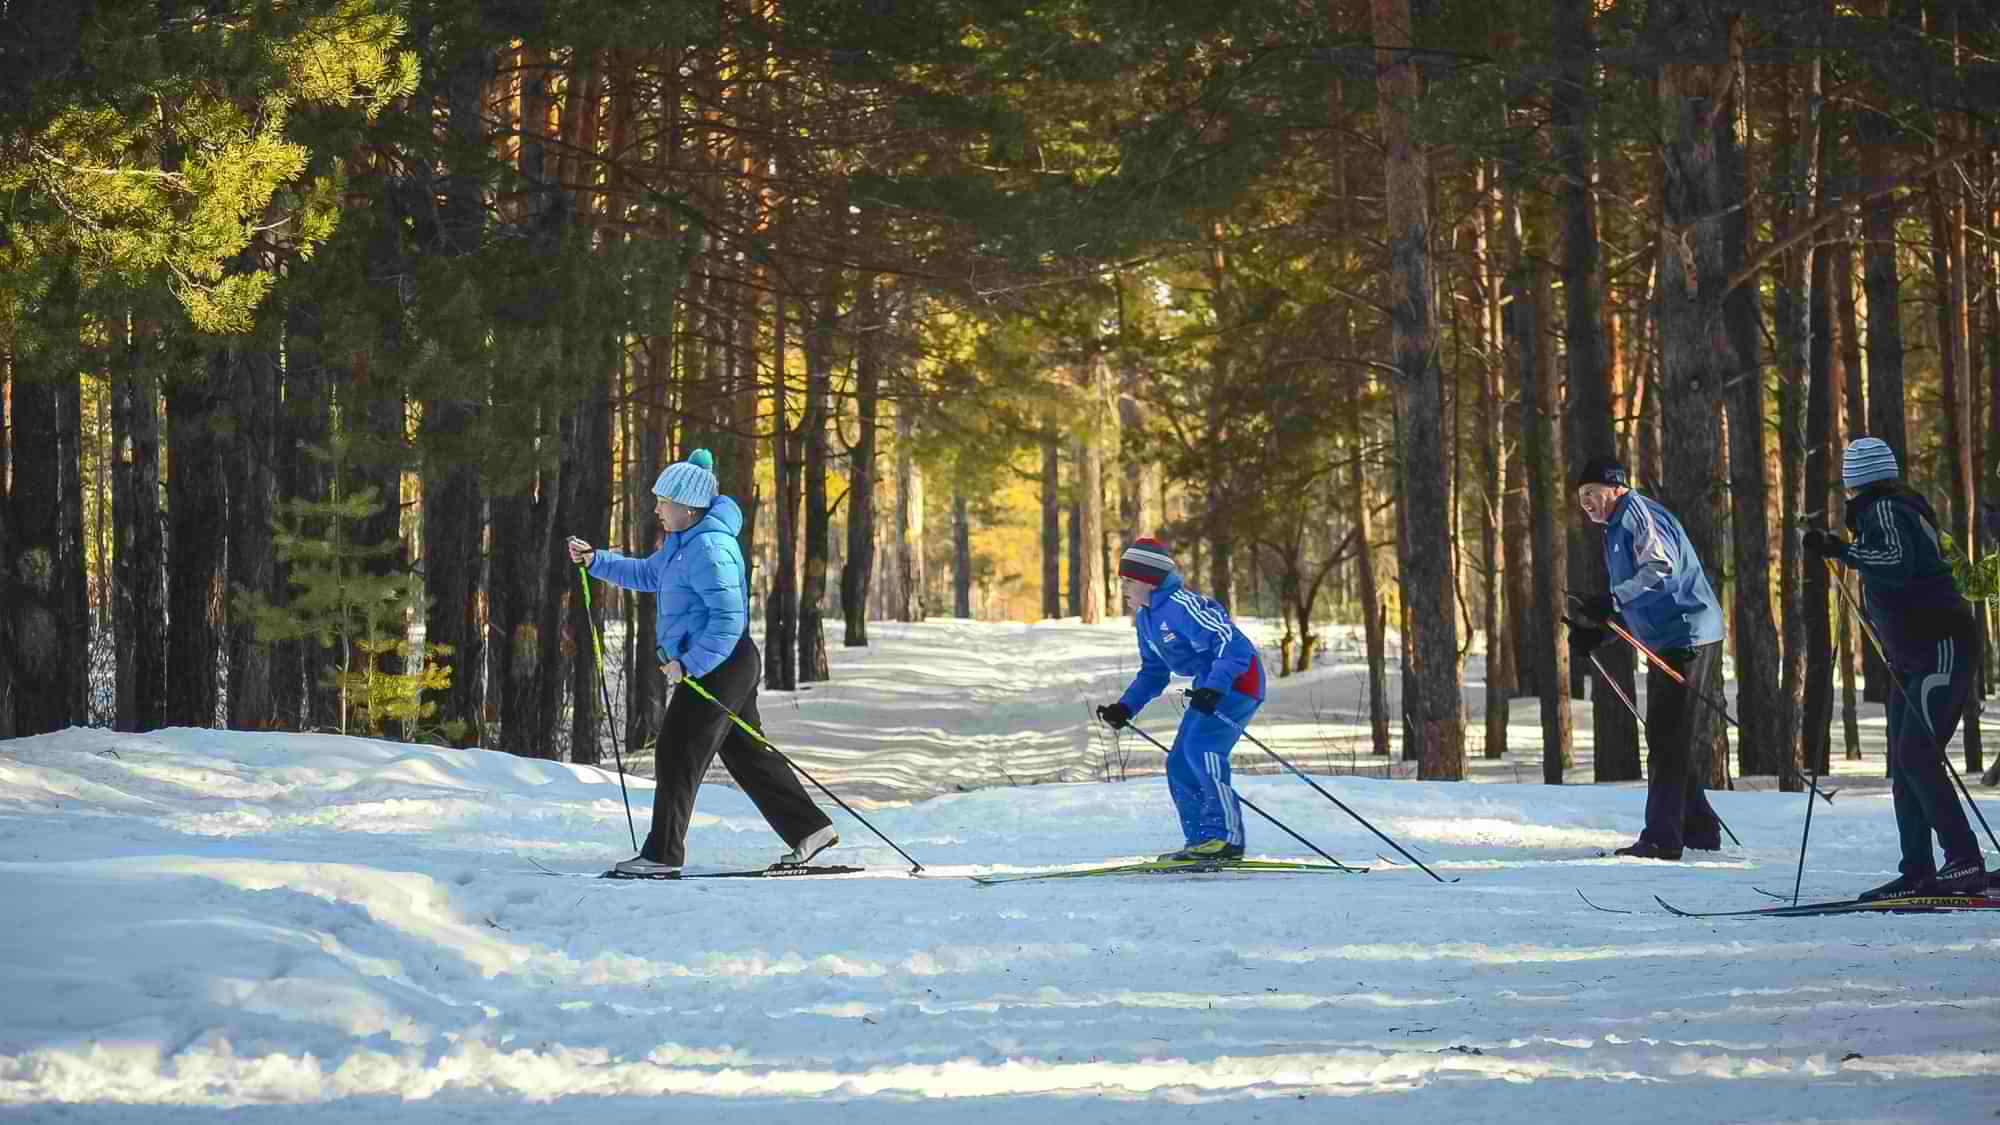 Family cross-country skiing